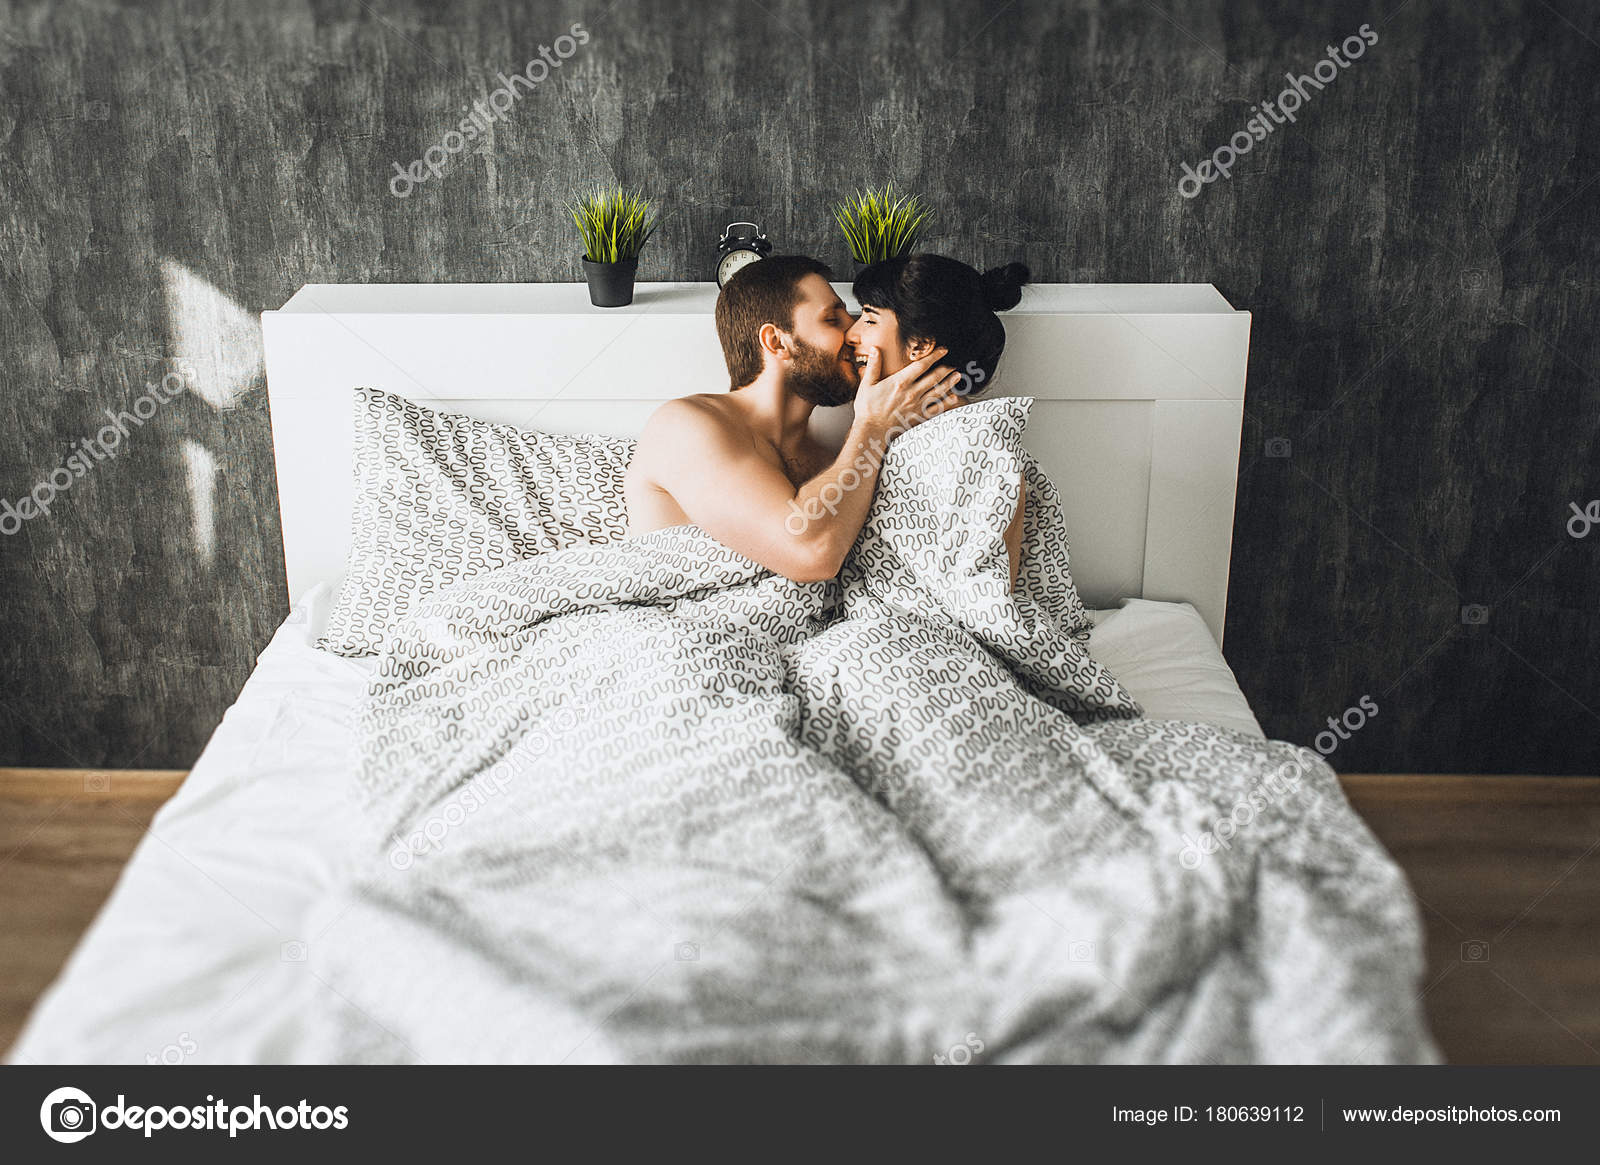 Love On Bed At Night Another Home Image Ideas